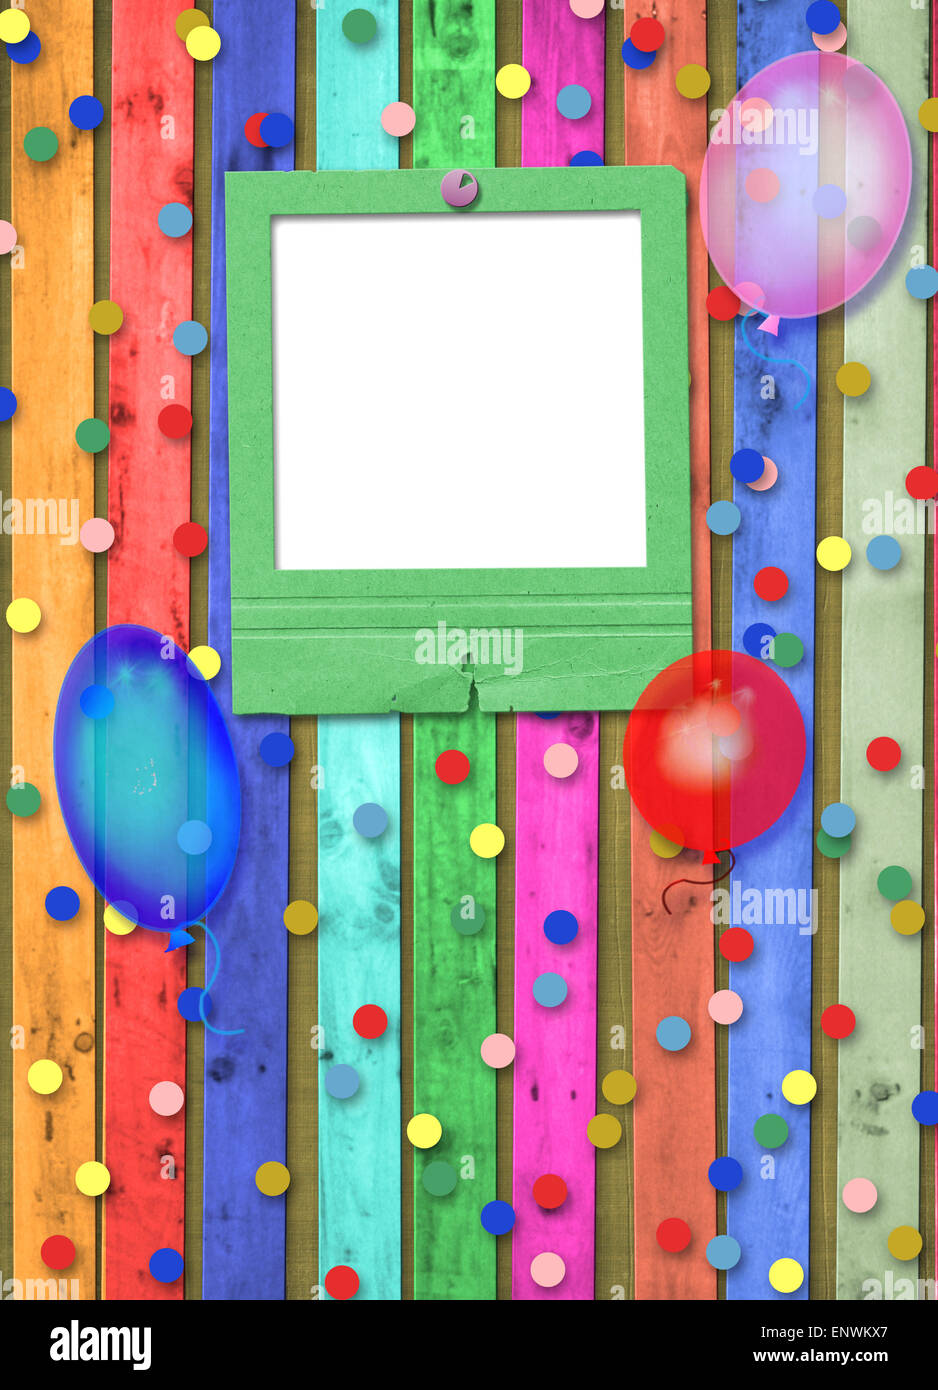 Old slide with balloons and confetti on the abstract background Stock Photo